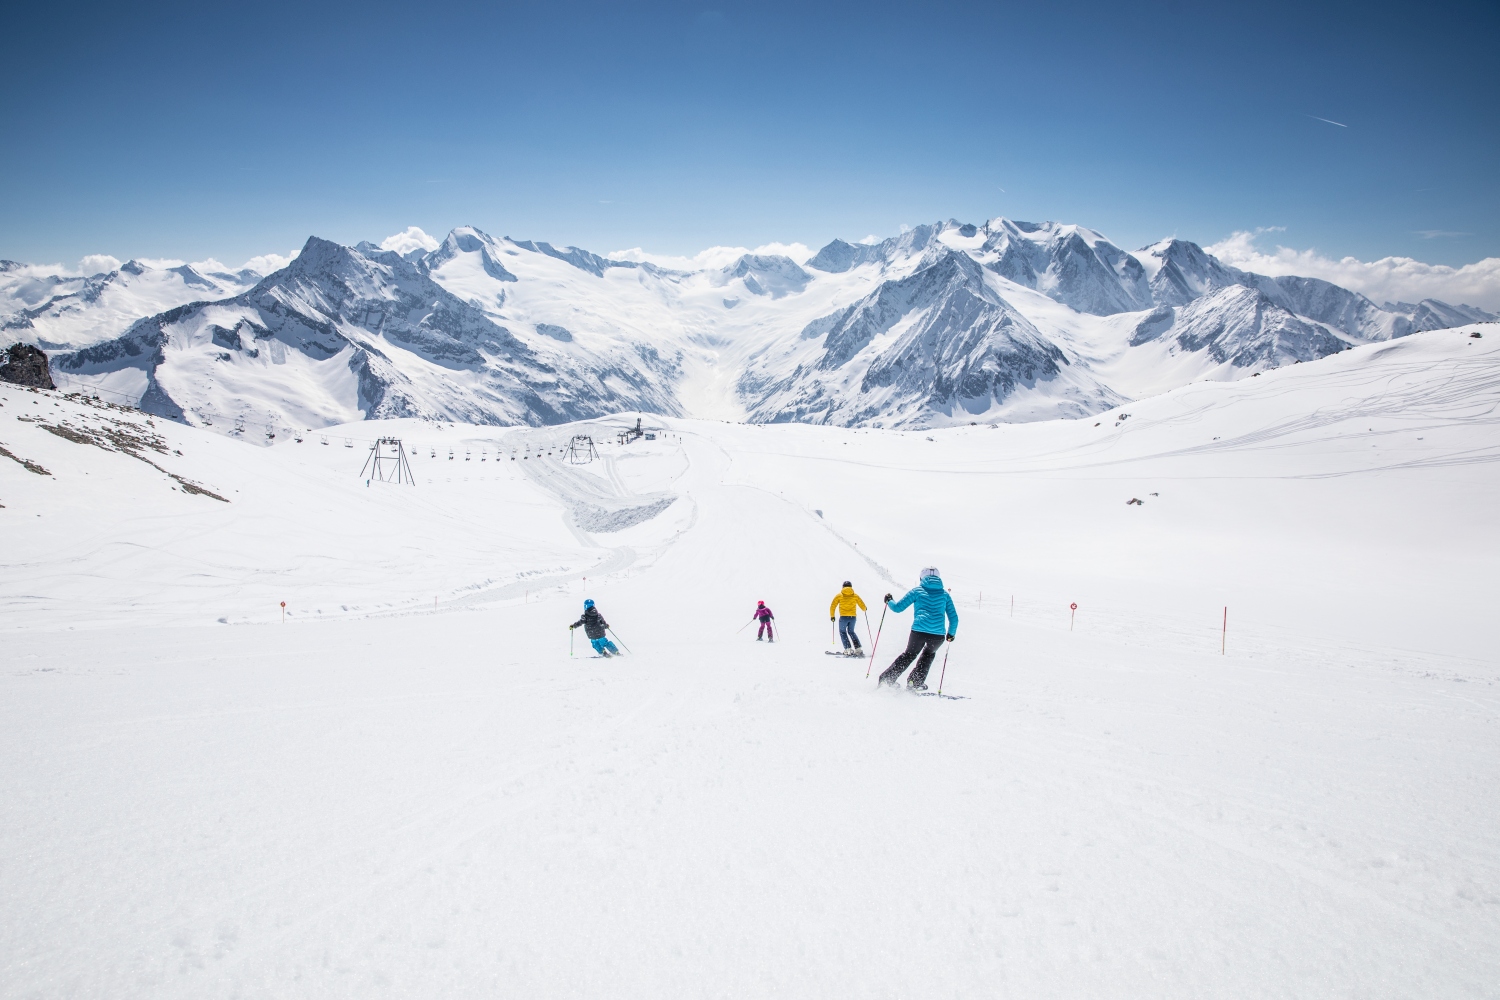 Family skiing down piste with mountains in background - Zillertal, Austria